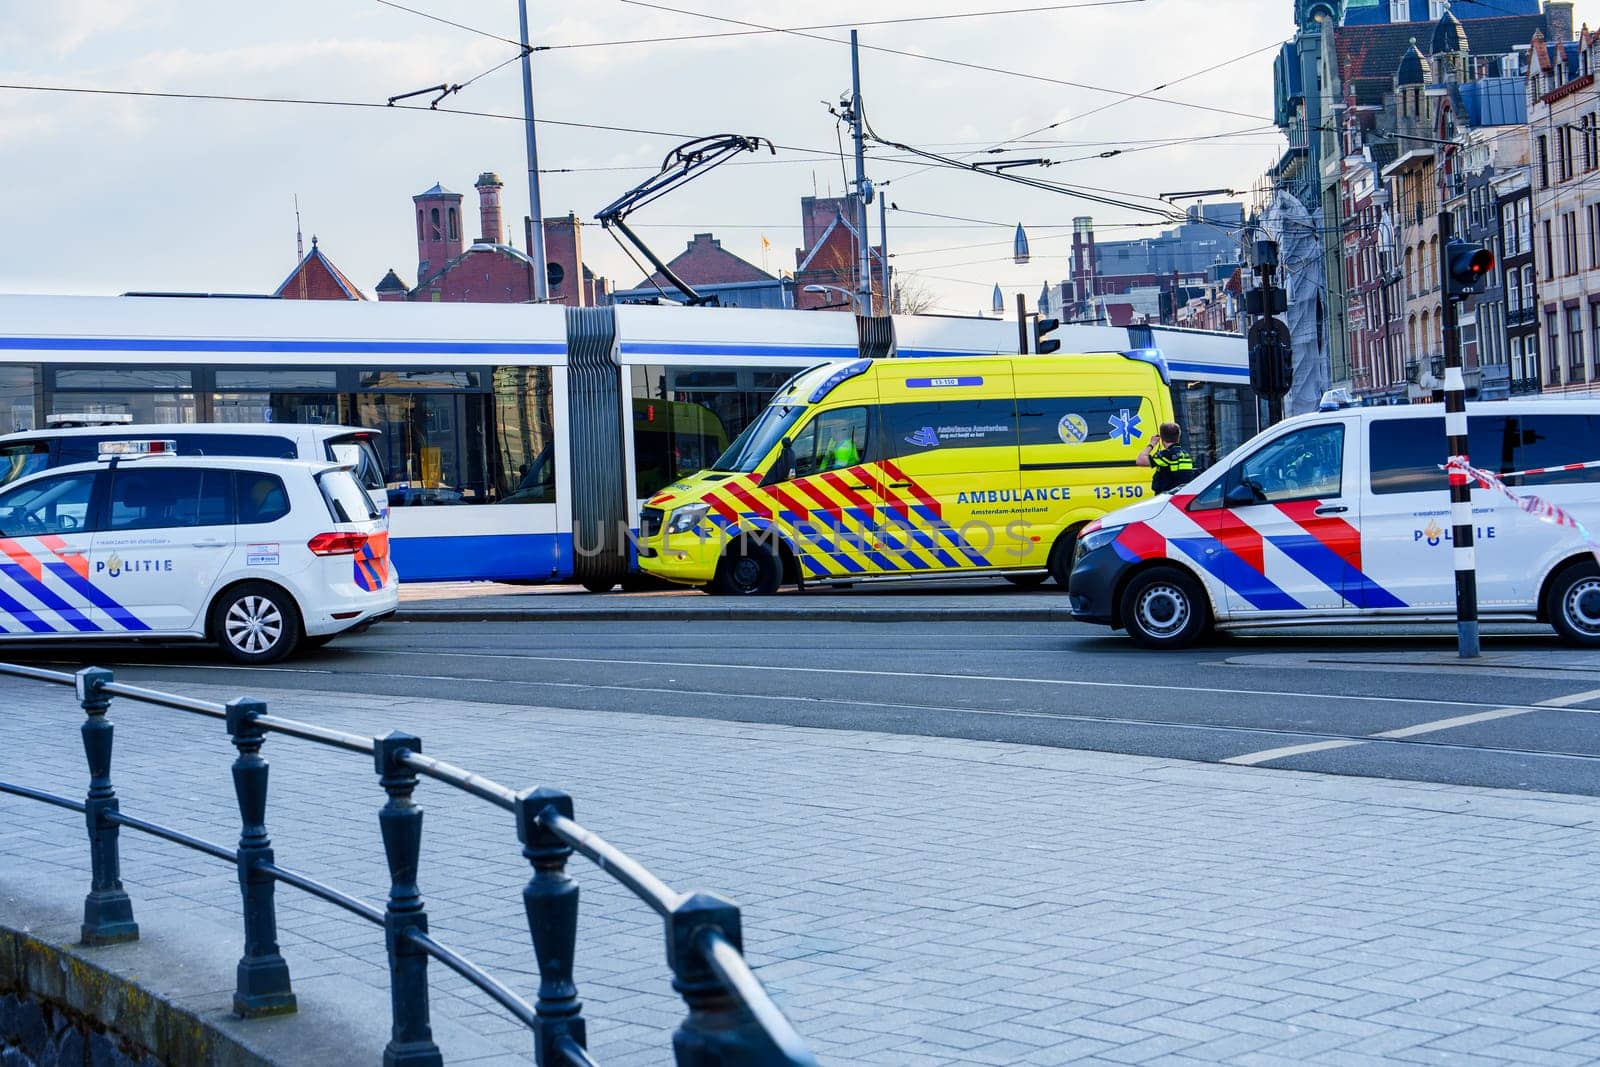 Emergency situation in Amsterdam city center as a pedestrian or cyclist has been hit. The ambulances and police vehicles are on the scene to provide assistance.